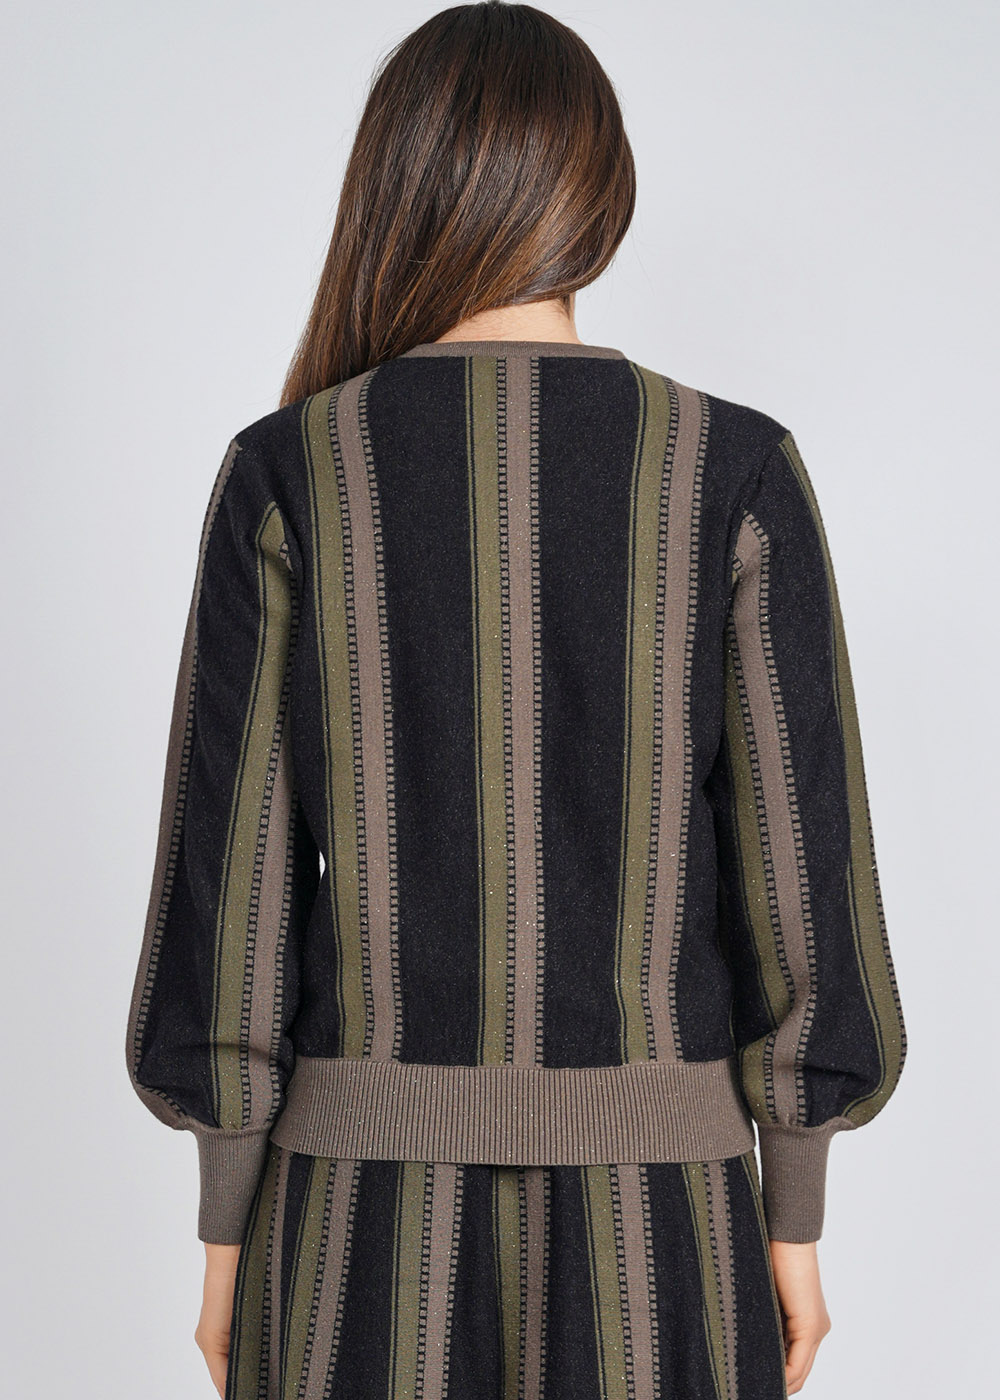 Black Knit Sweater with Olive Lanes